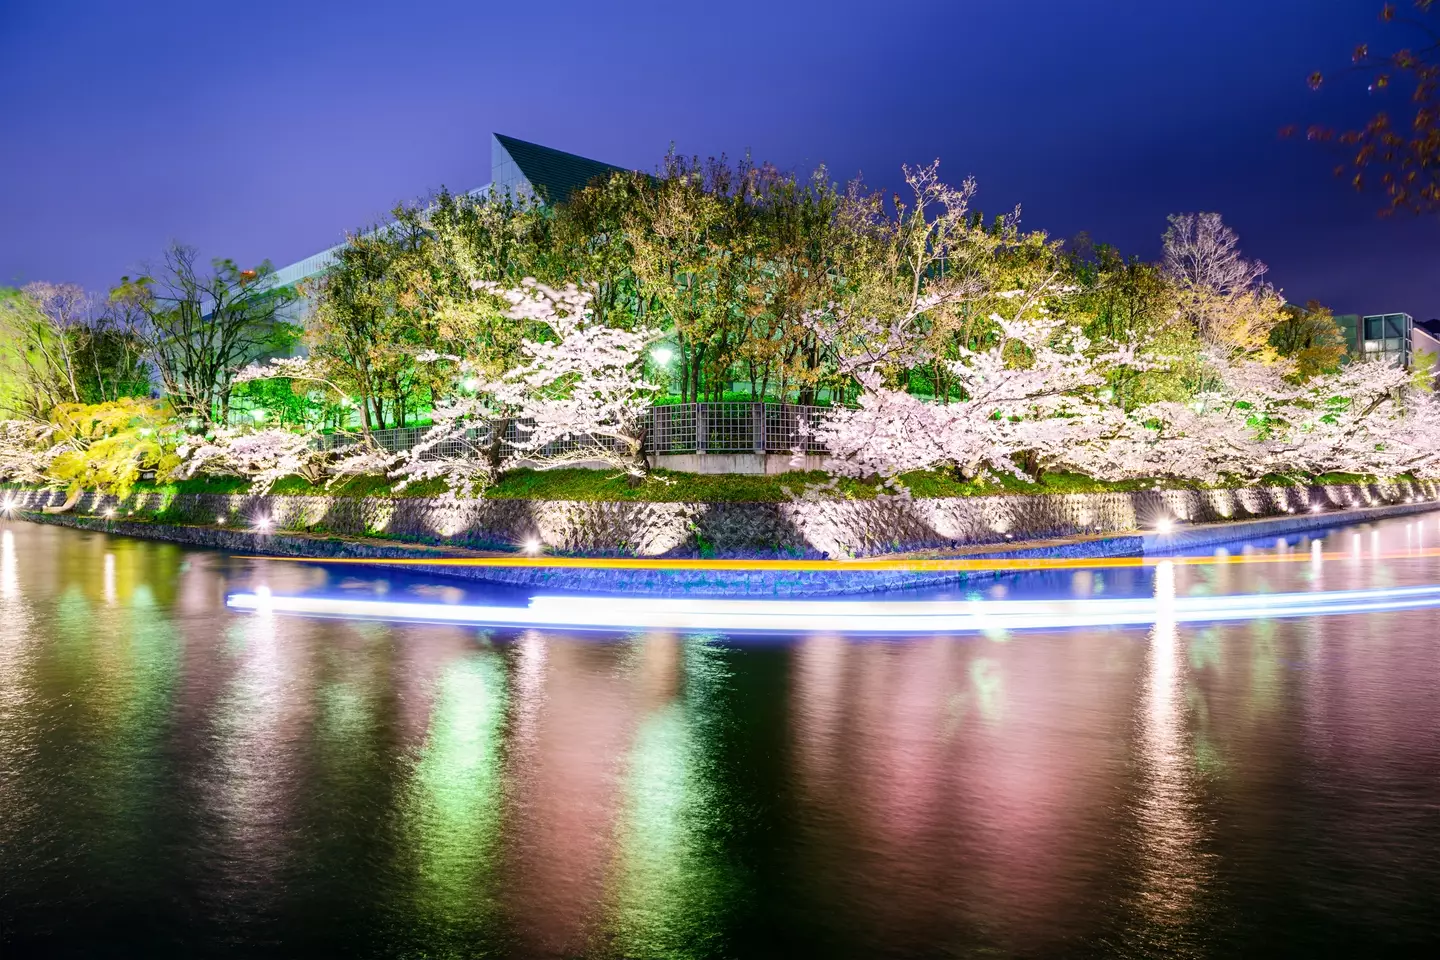 Cherry blossom festivals are a huge cultural event in Japan.